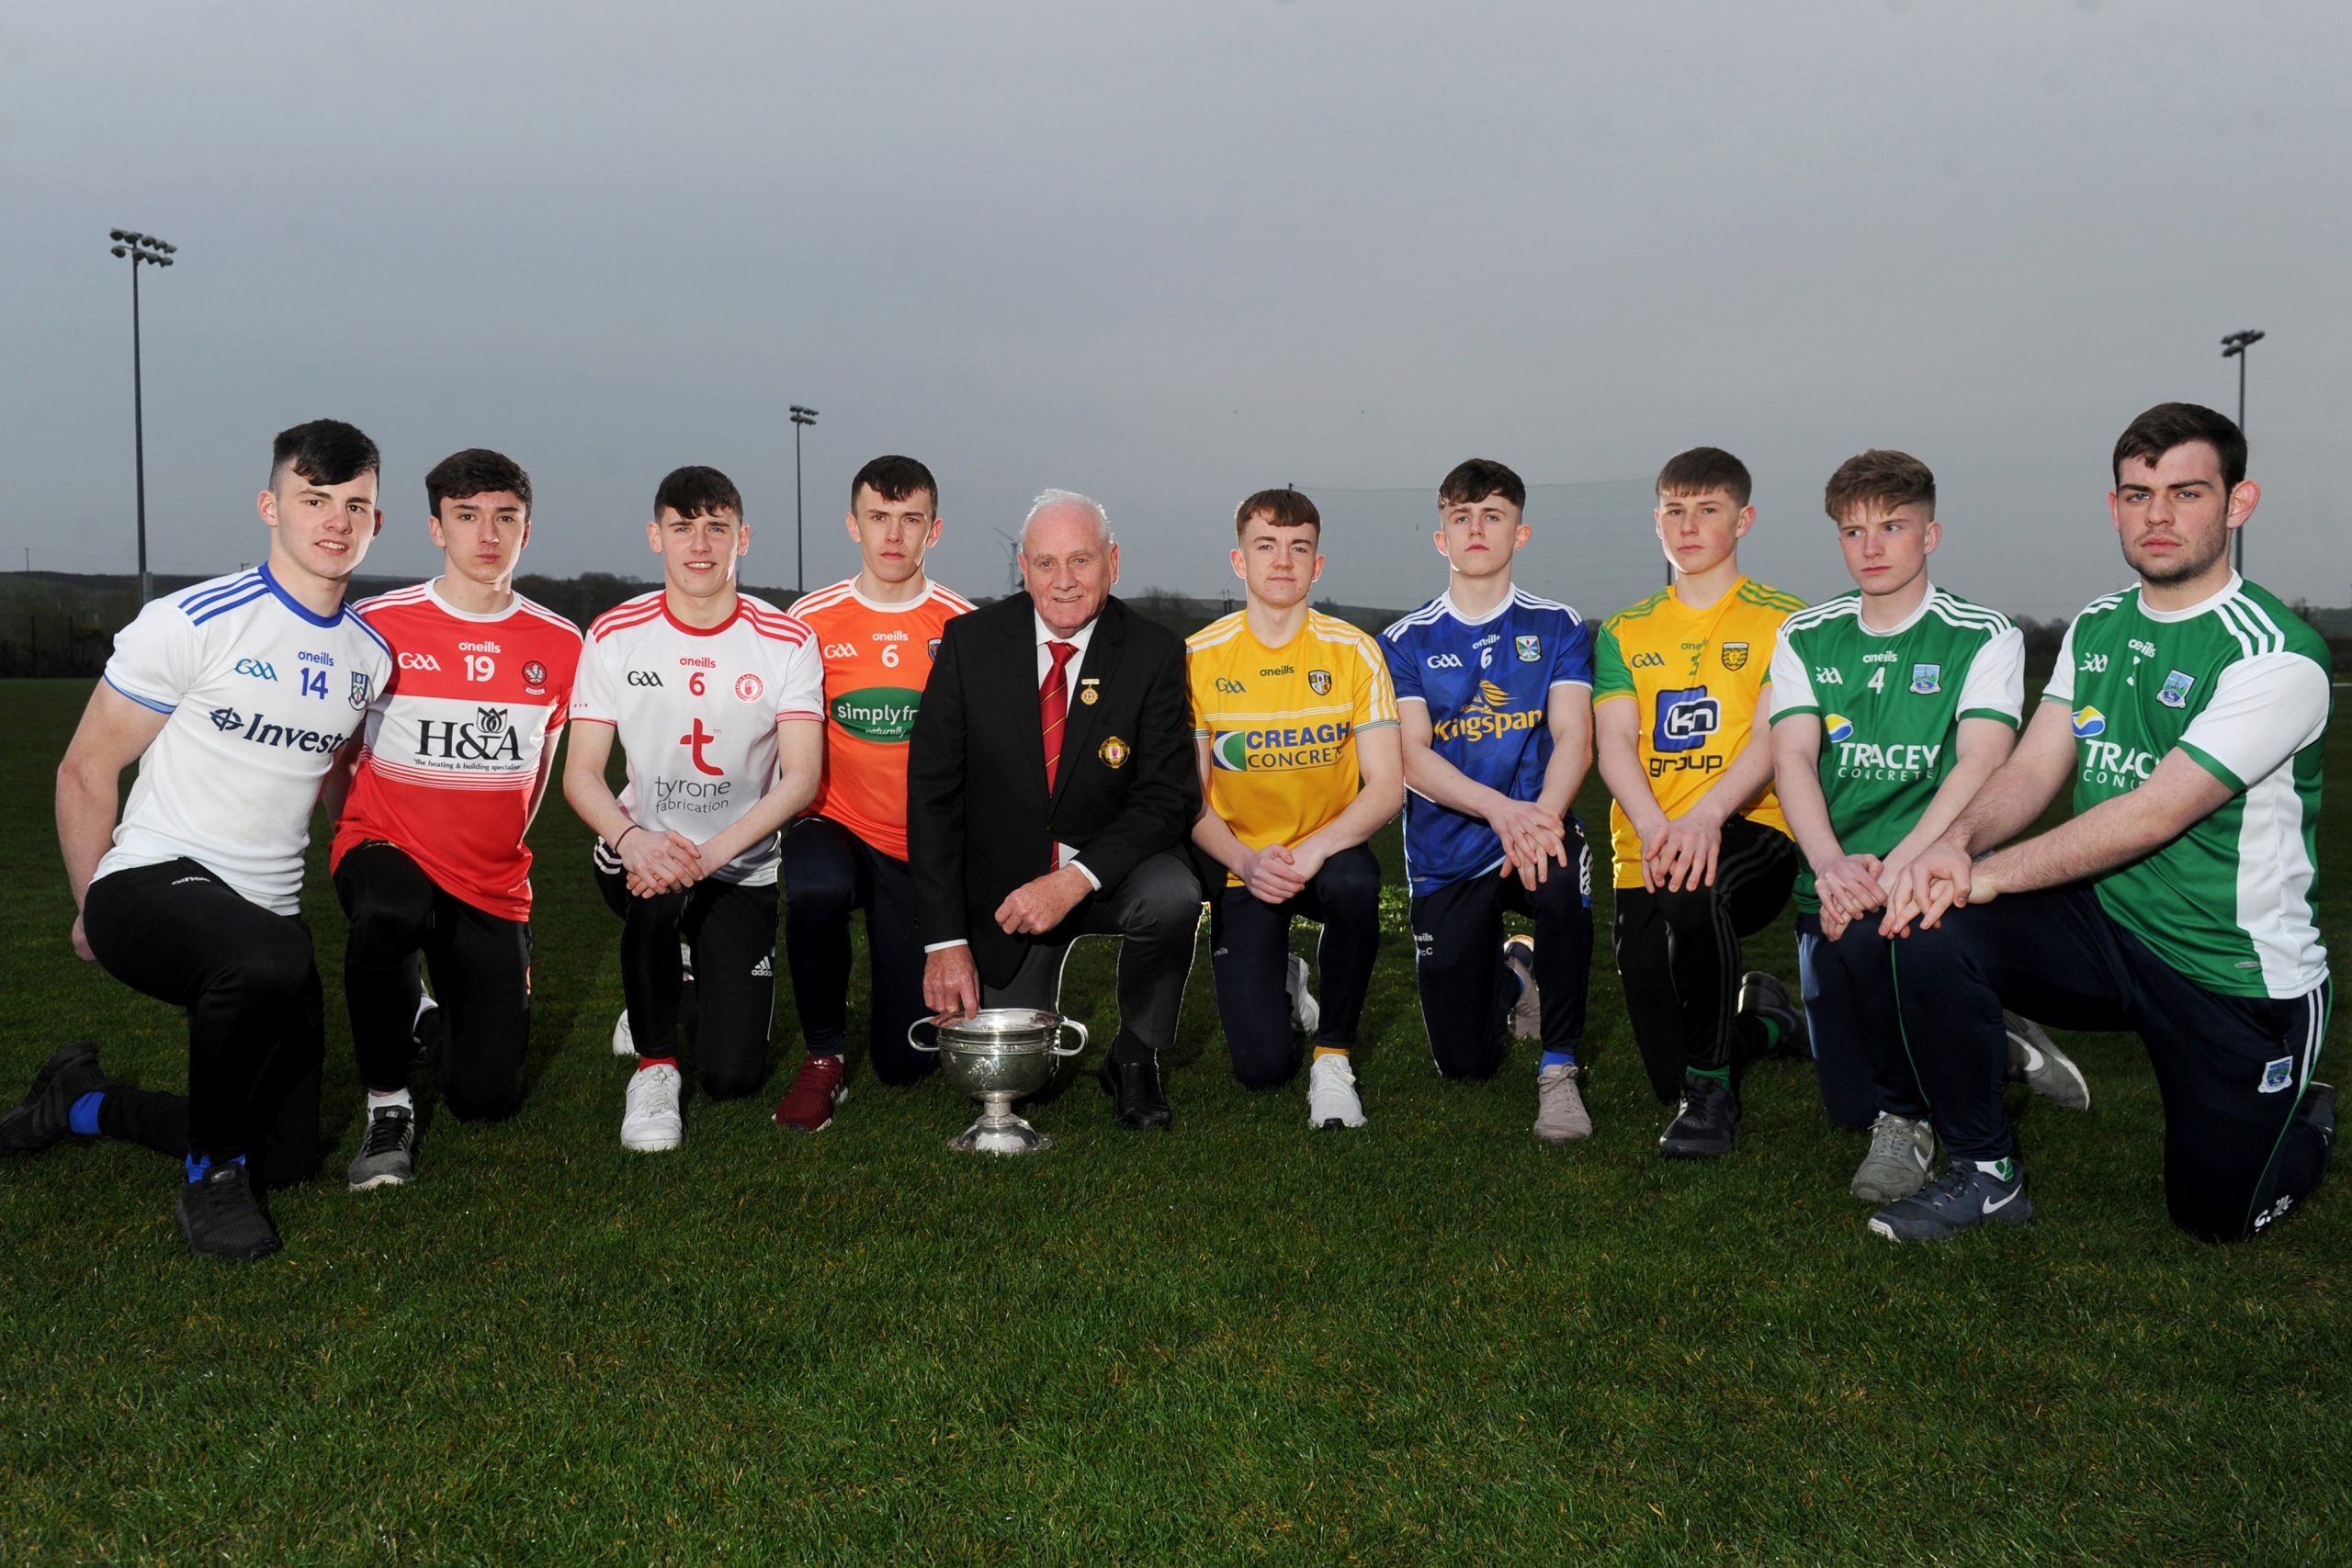 Electric Ireland Ulster Minor Championship officially launched